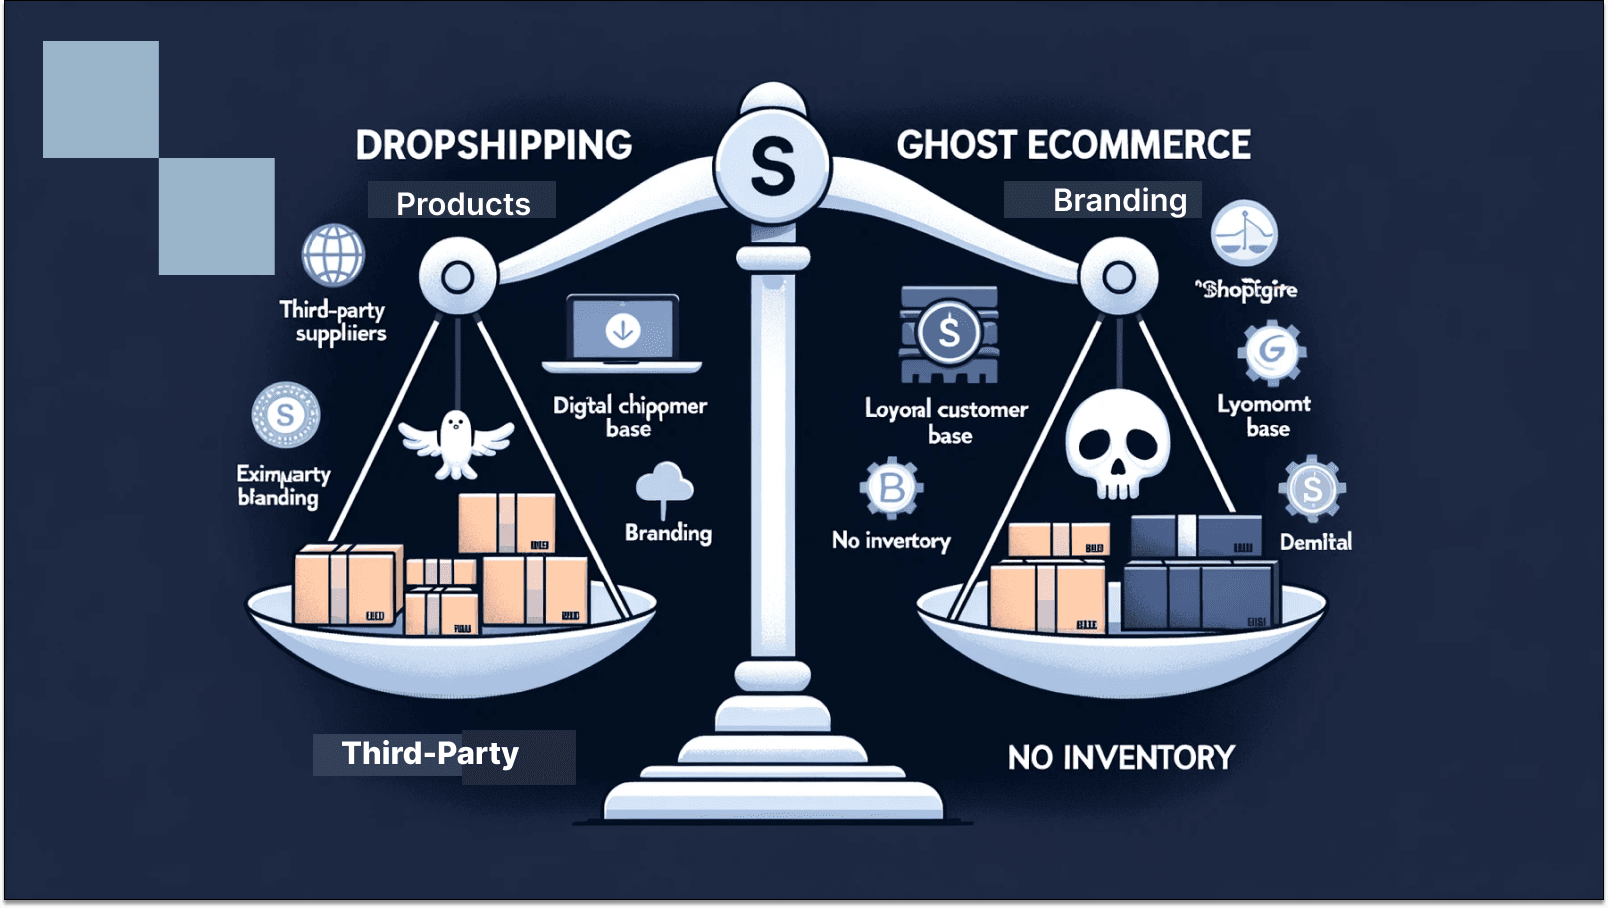 Dropshipping vs ghost ecommerce